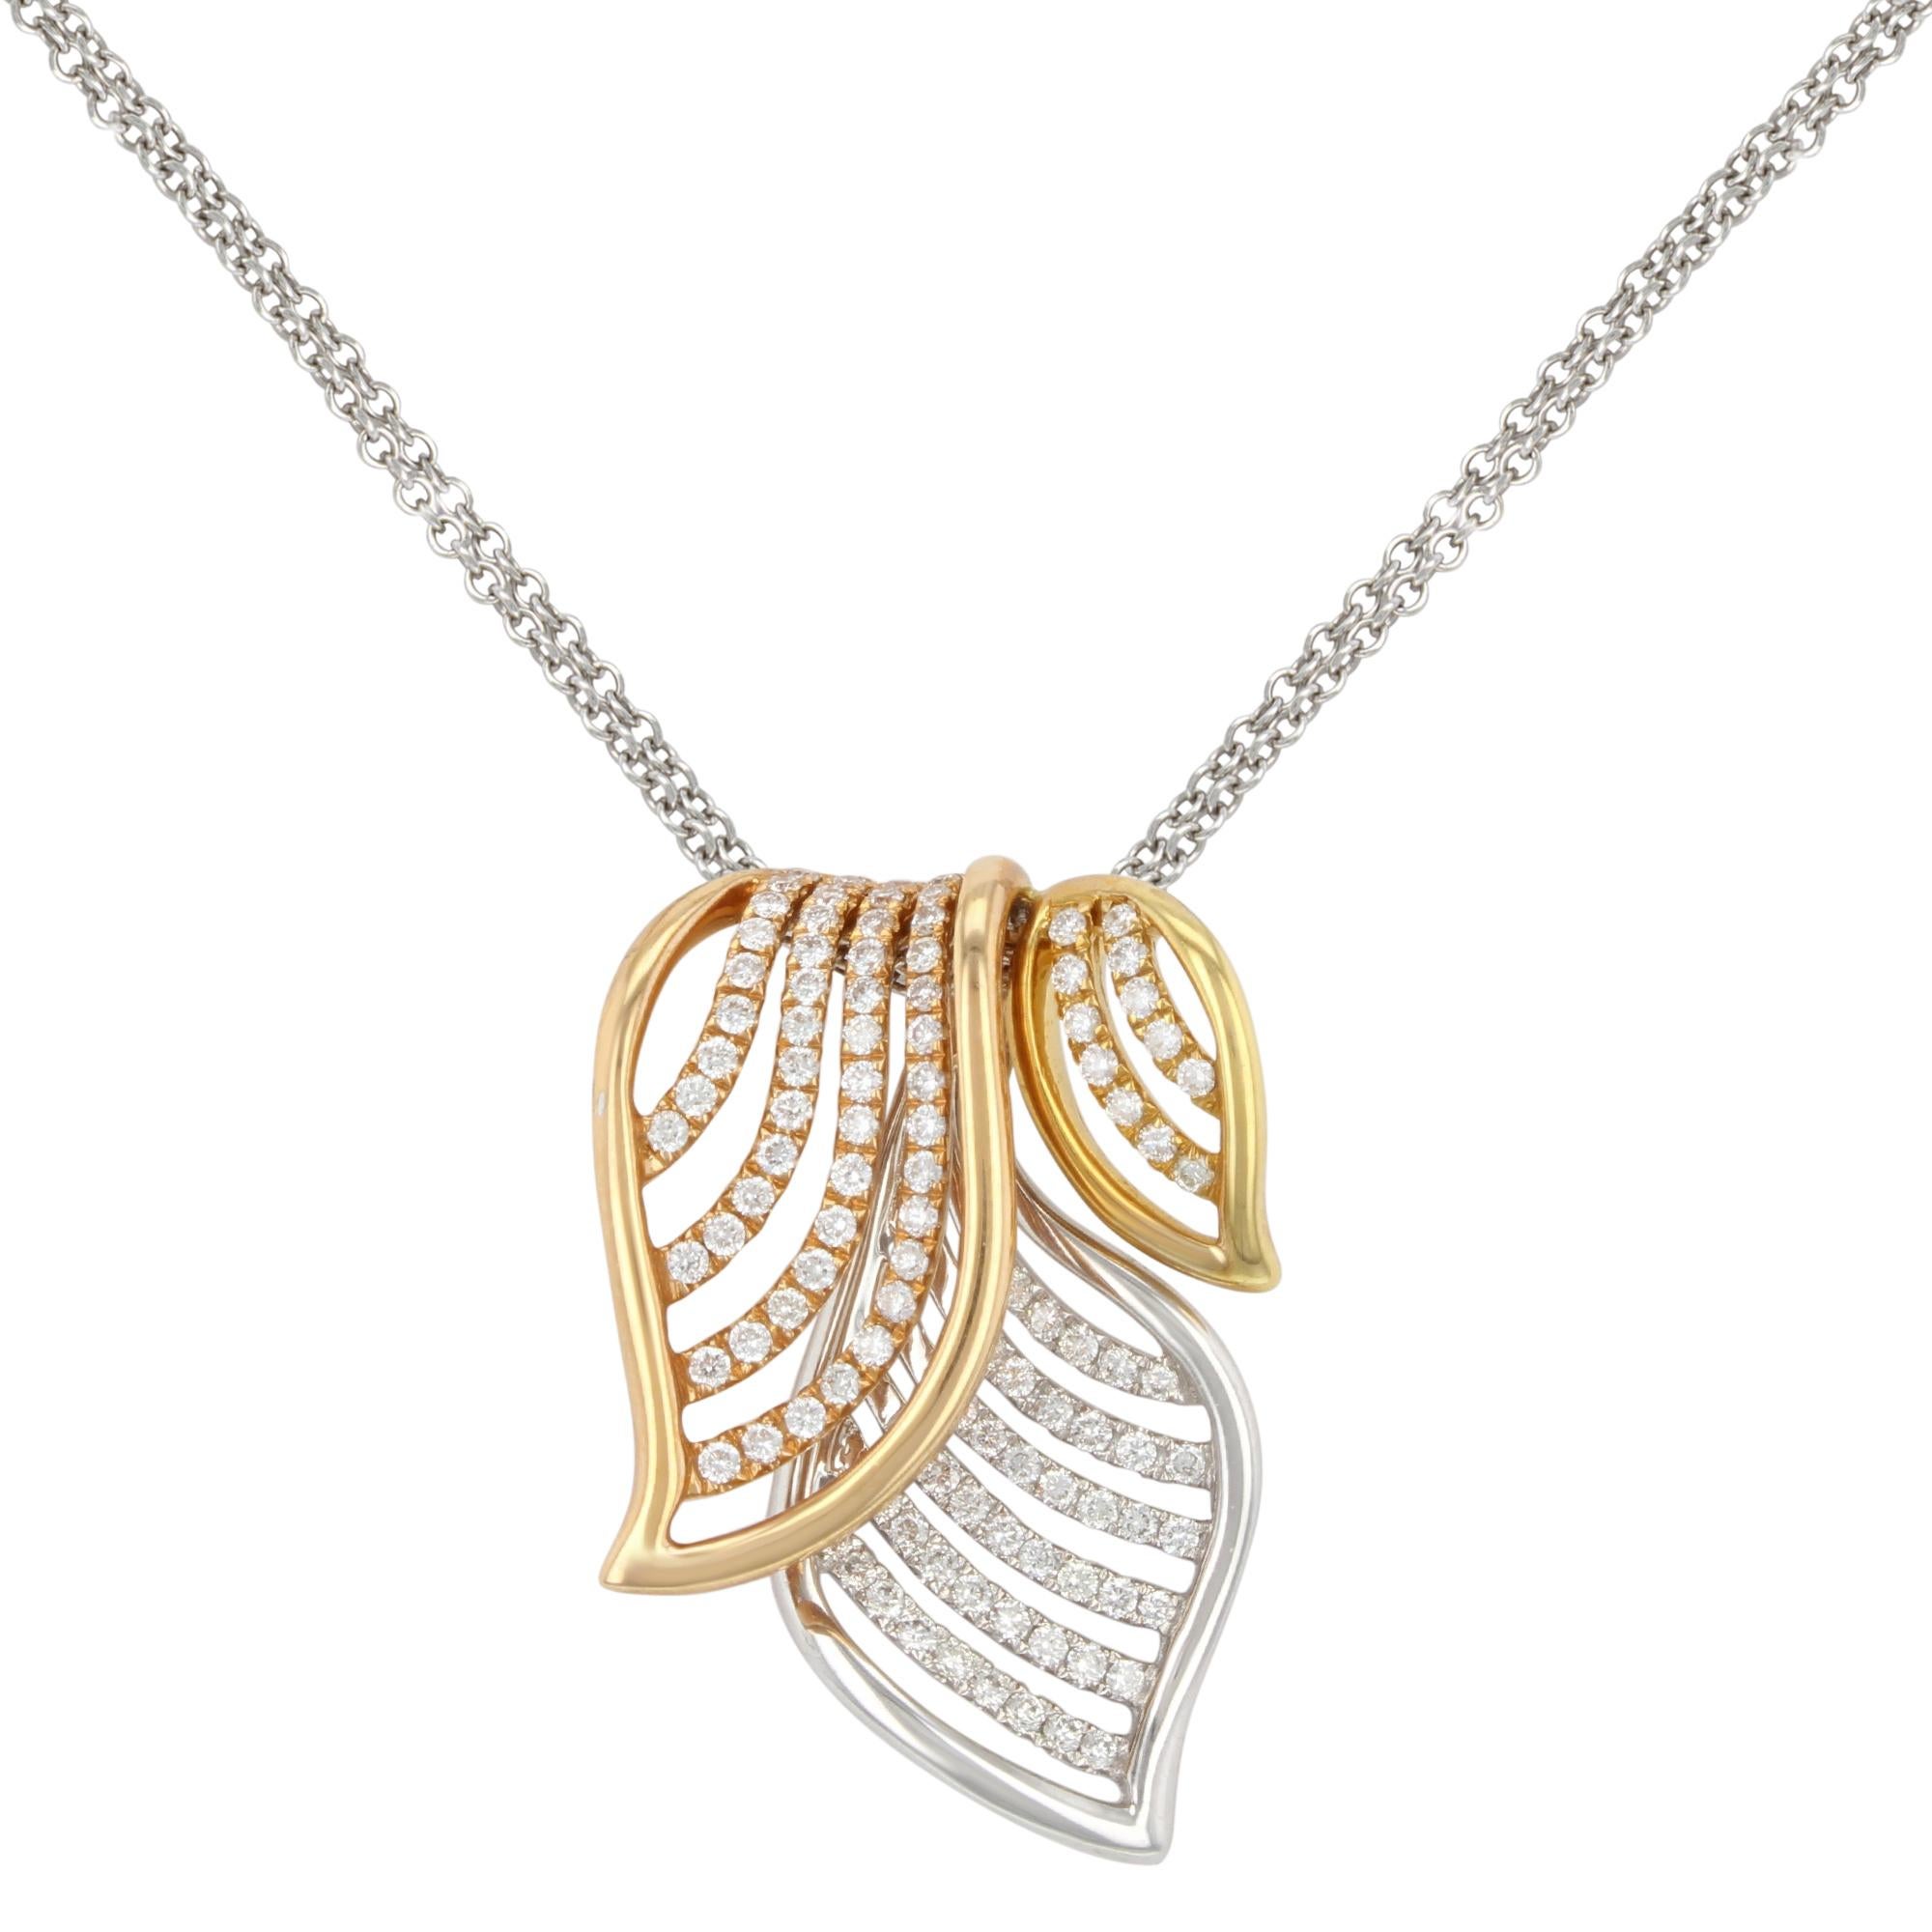 This stunning three tone diamond pendant necklace is a must have for your jewelry collection. Crafted in 18k white, yellow & rose gold and encrusted with 0.67 carat of dazzling round cut diamonds. Necklace length: 16.75